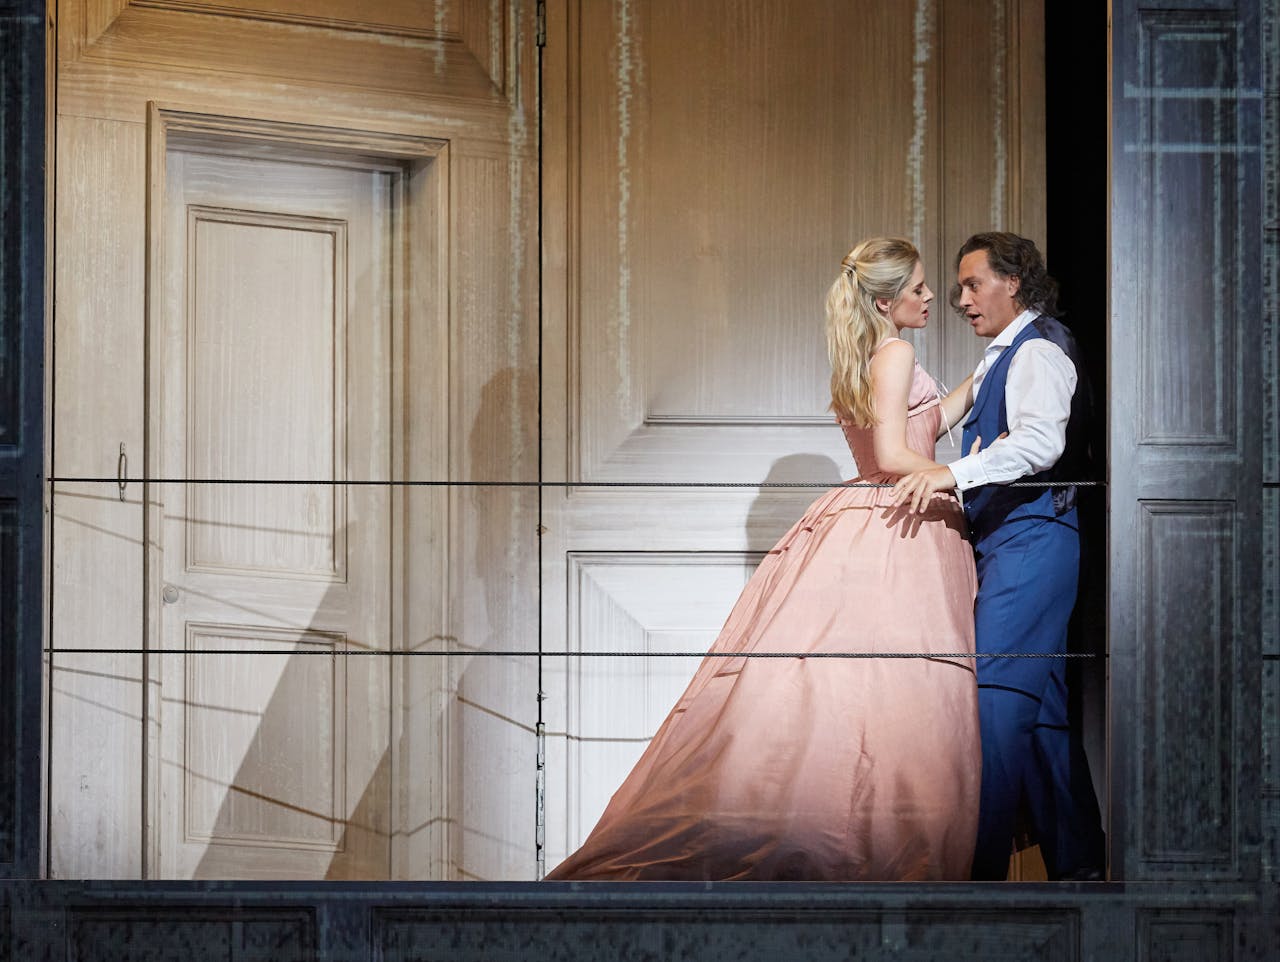 Malin Bystrom as Donna Anna and Erwin Schrott as Don Giovanni in Don Giovanni, The Royal Opera © 2019 ROH. Photograph by Mark Douet